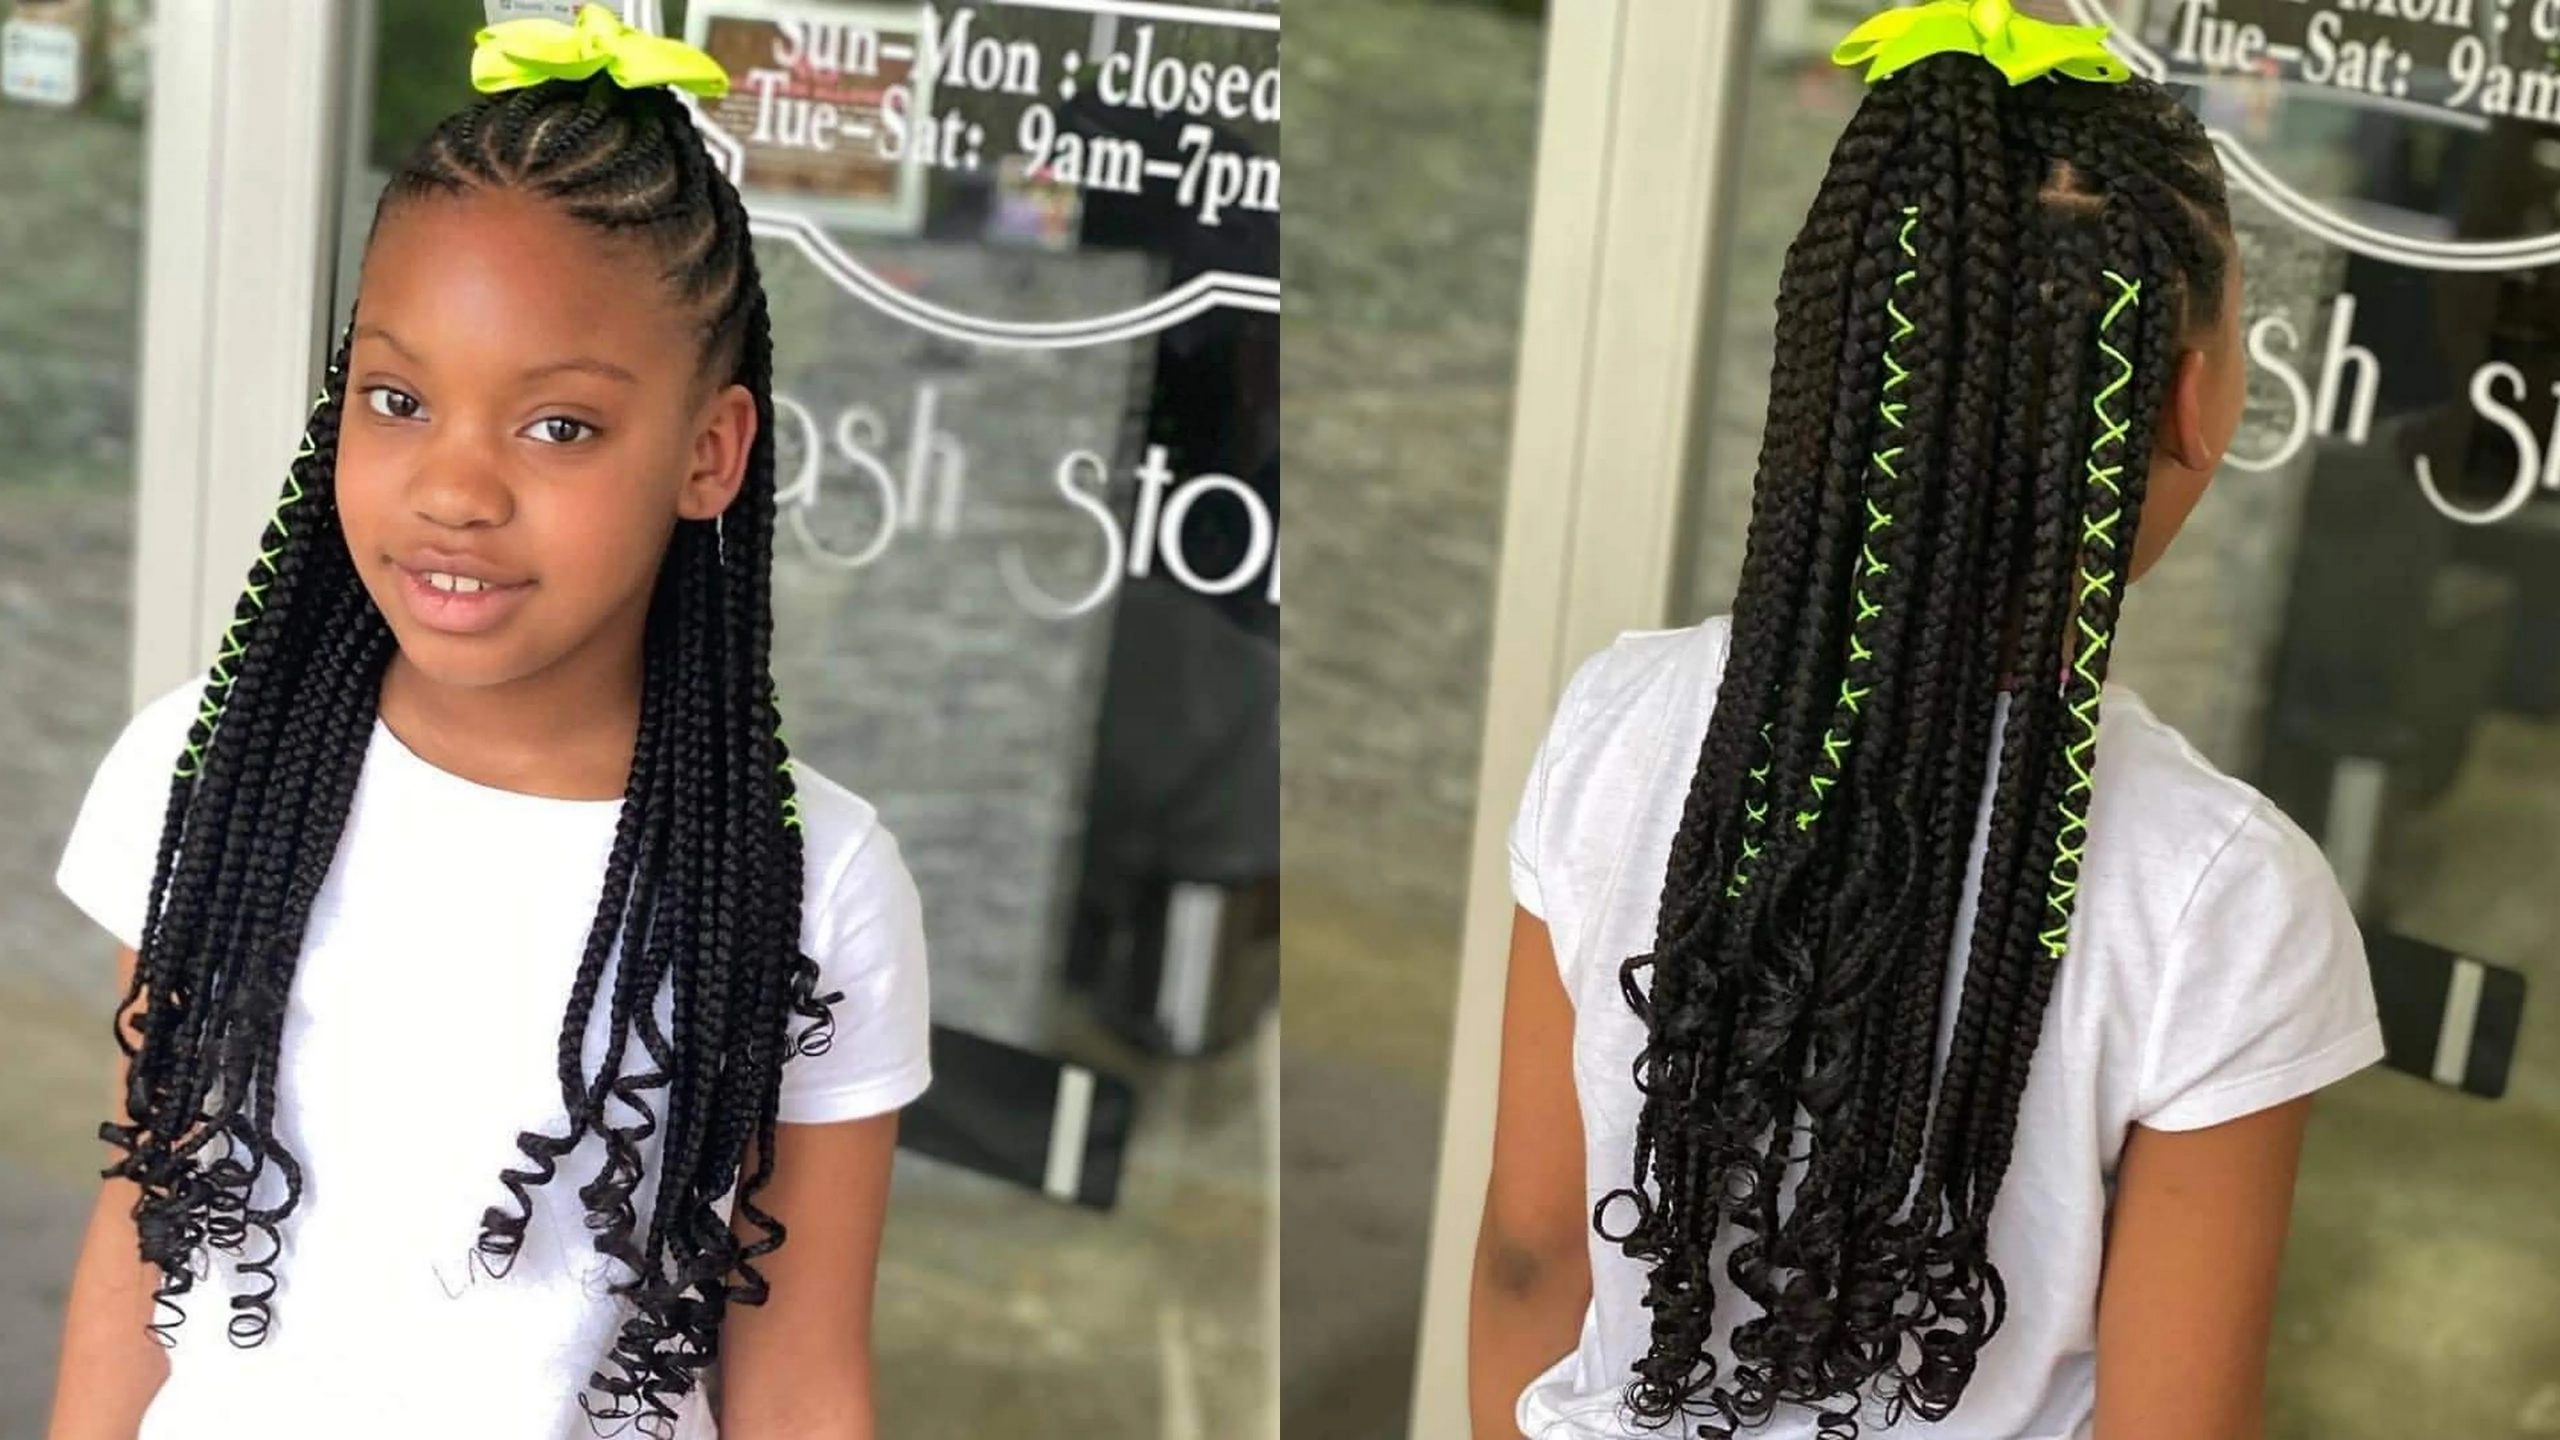 2022 Hairstyles For African Kids and Hairstyles For Little Girl - Reny  styles